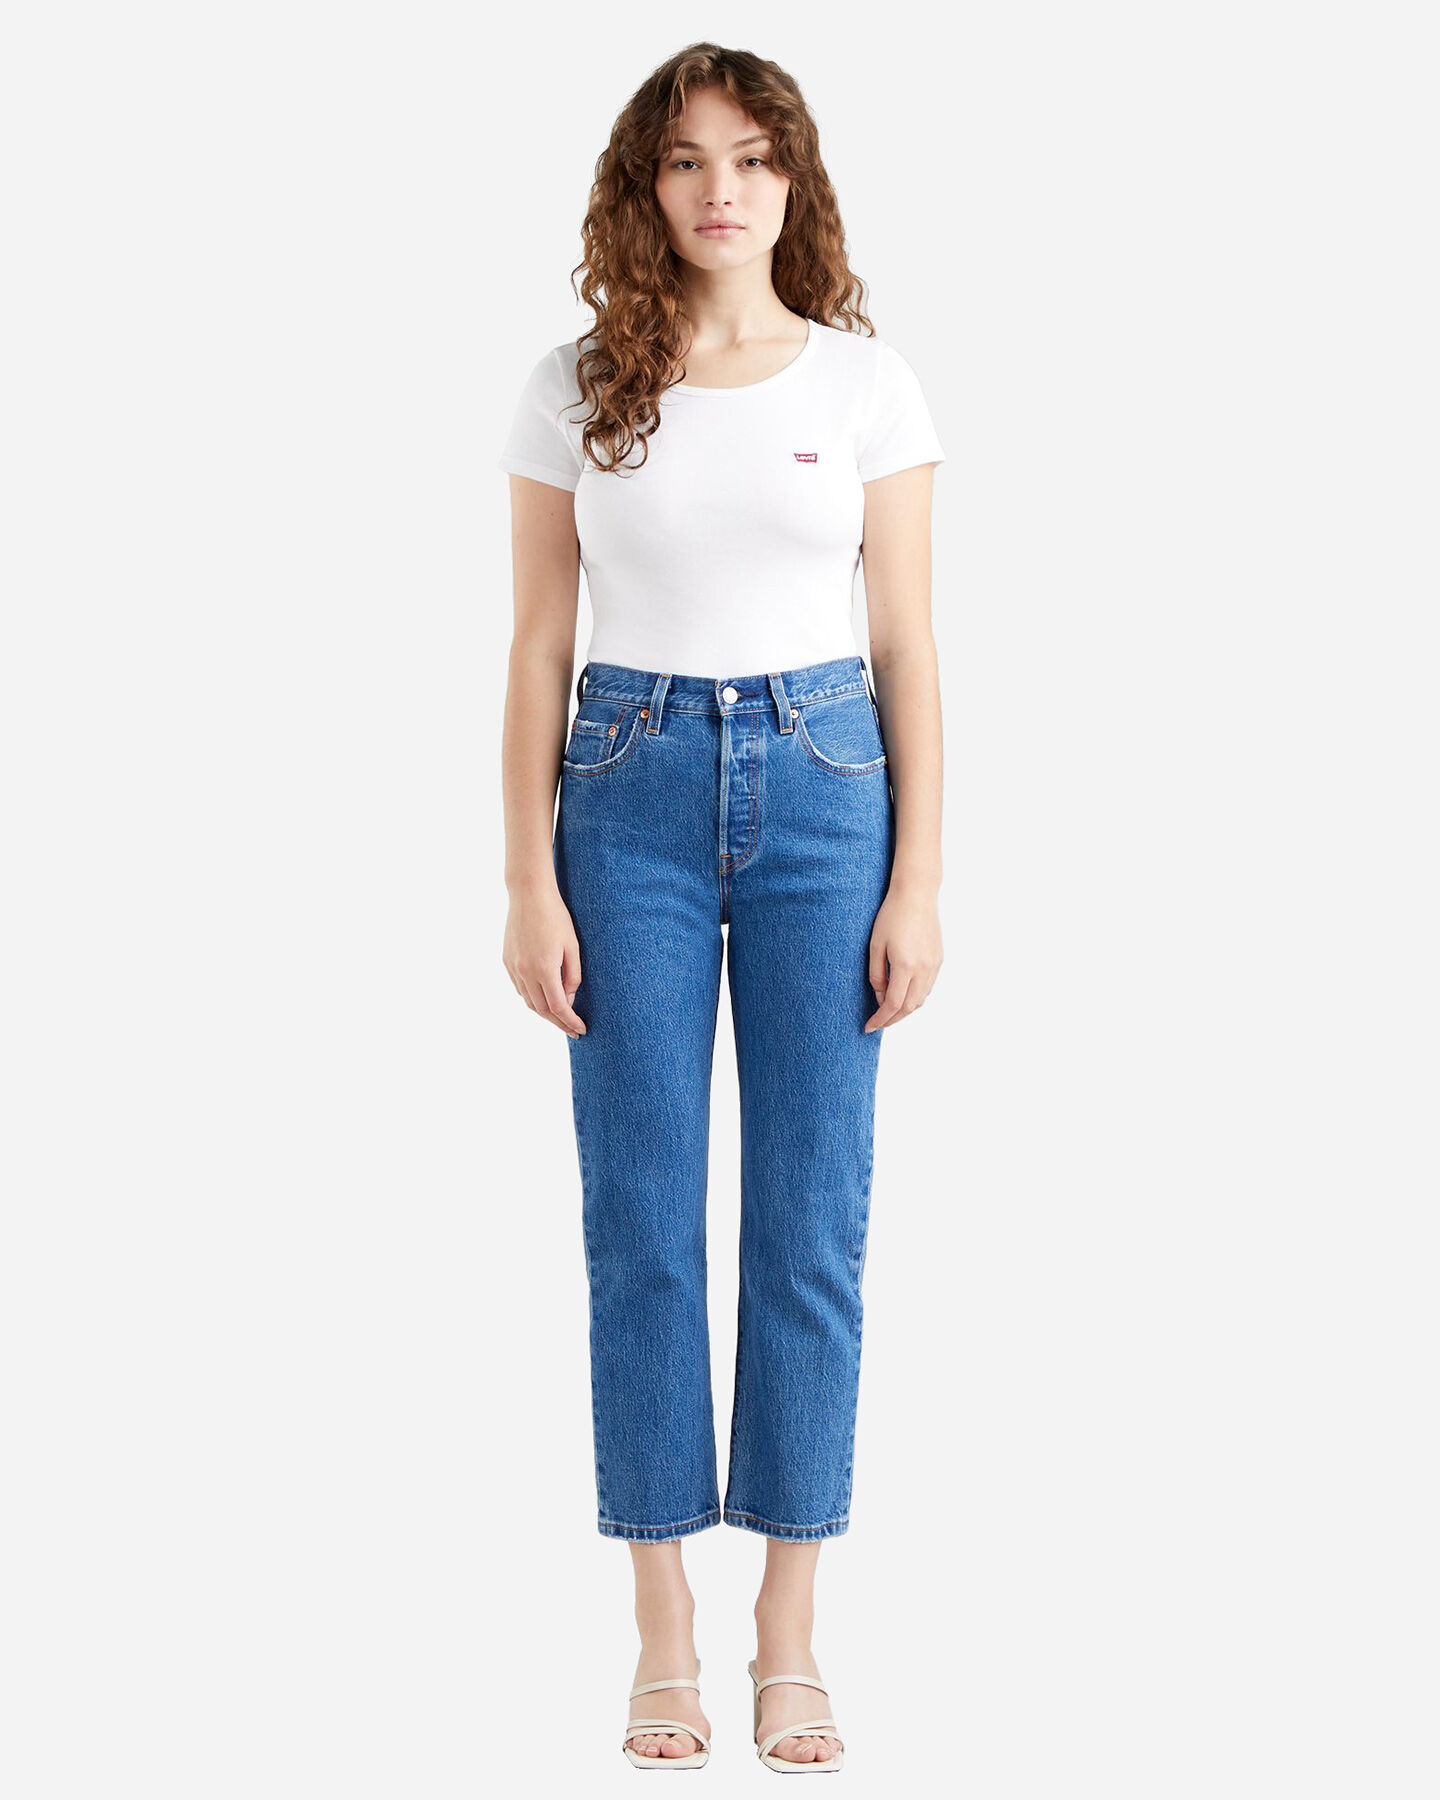  Jeans LEVI'S 501 CROP L28 W S4127913|0225|30 scatto 3